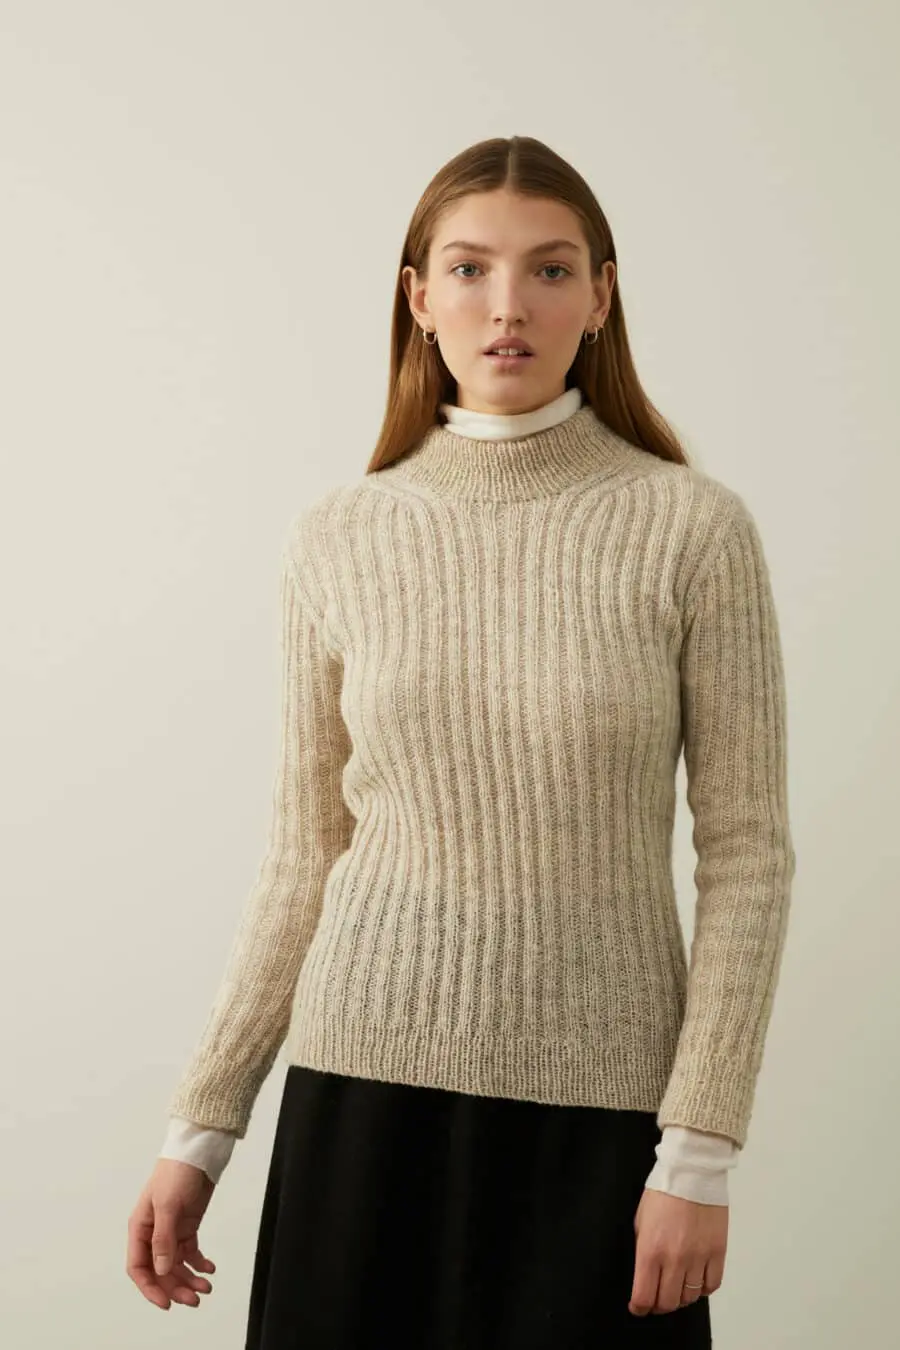 Lovely soft sweater knitted in Finull and Alpaca Silk